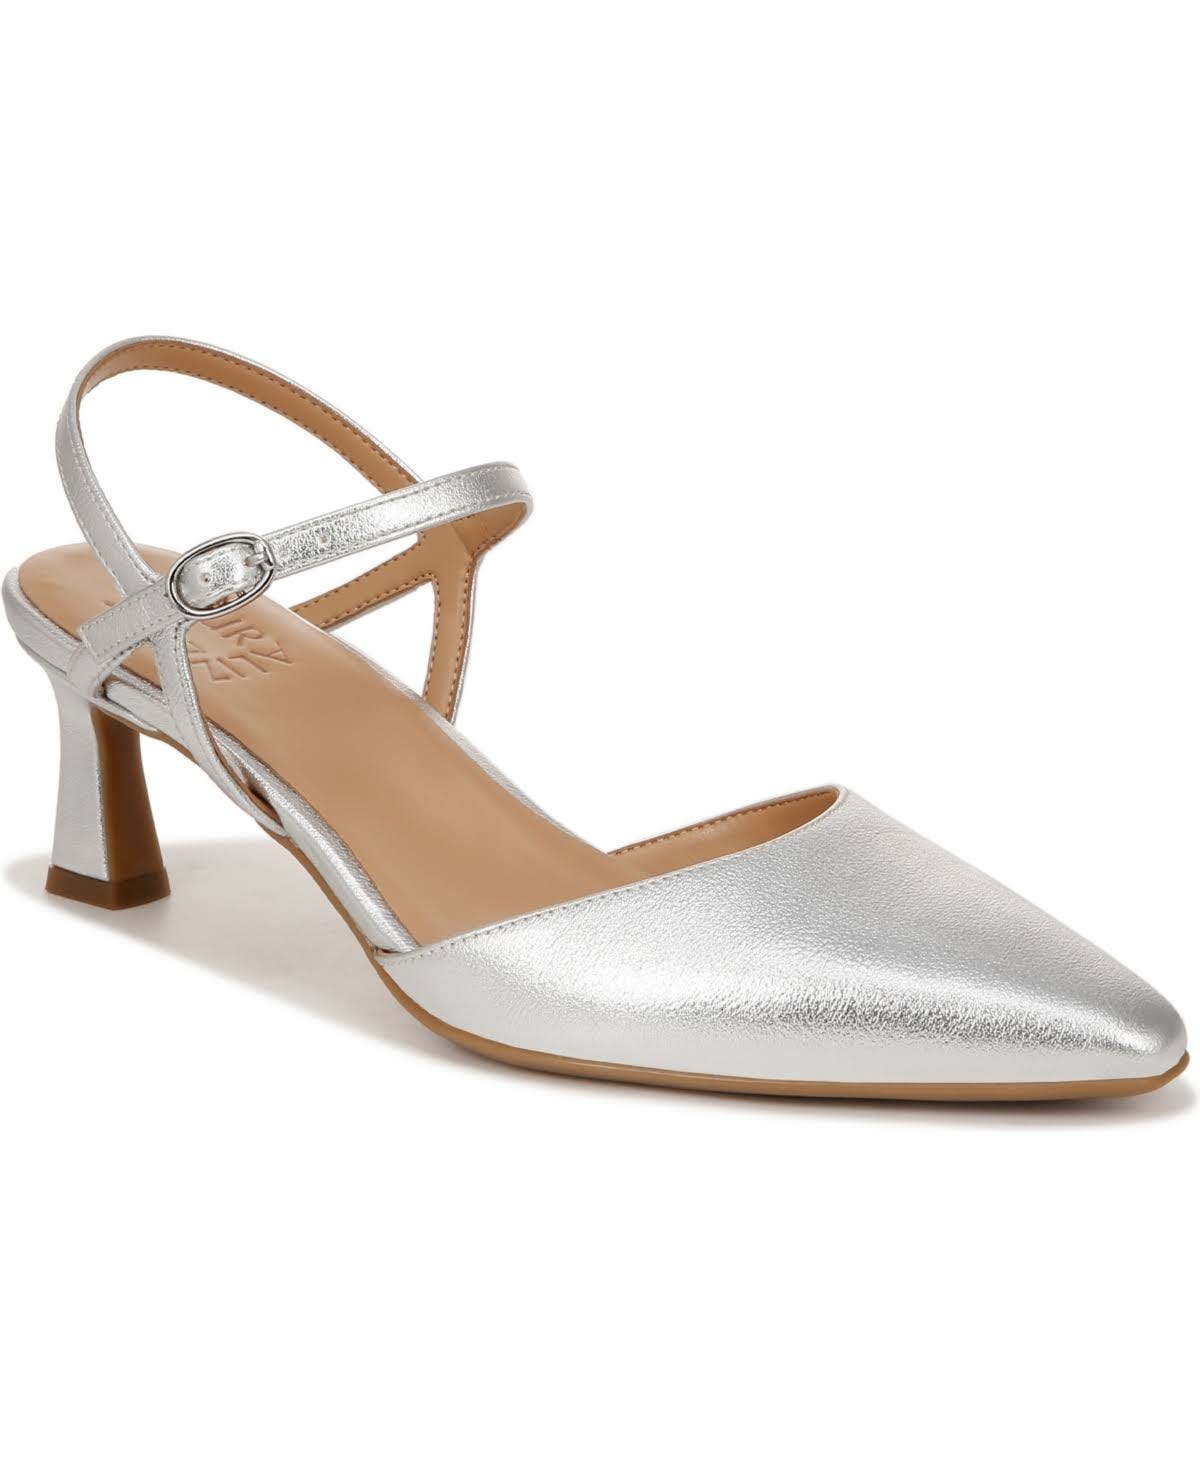 Ankle Strap Silver Pumps for All-Day Comfort and Style | Image